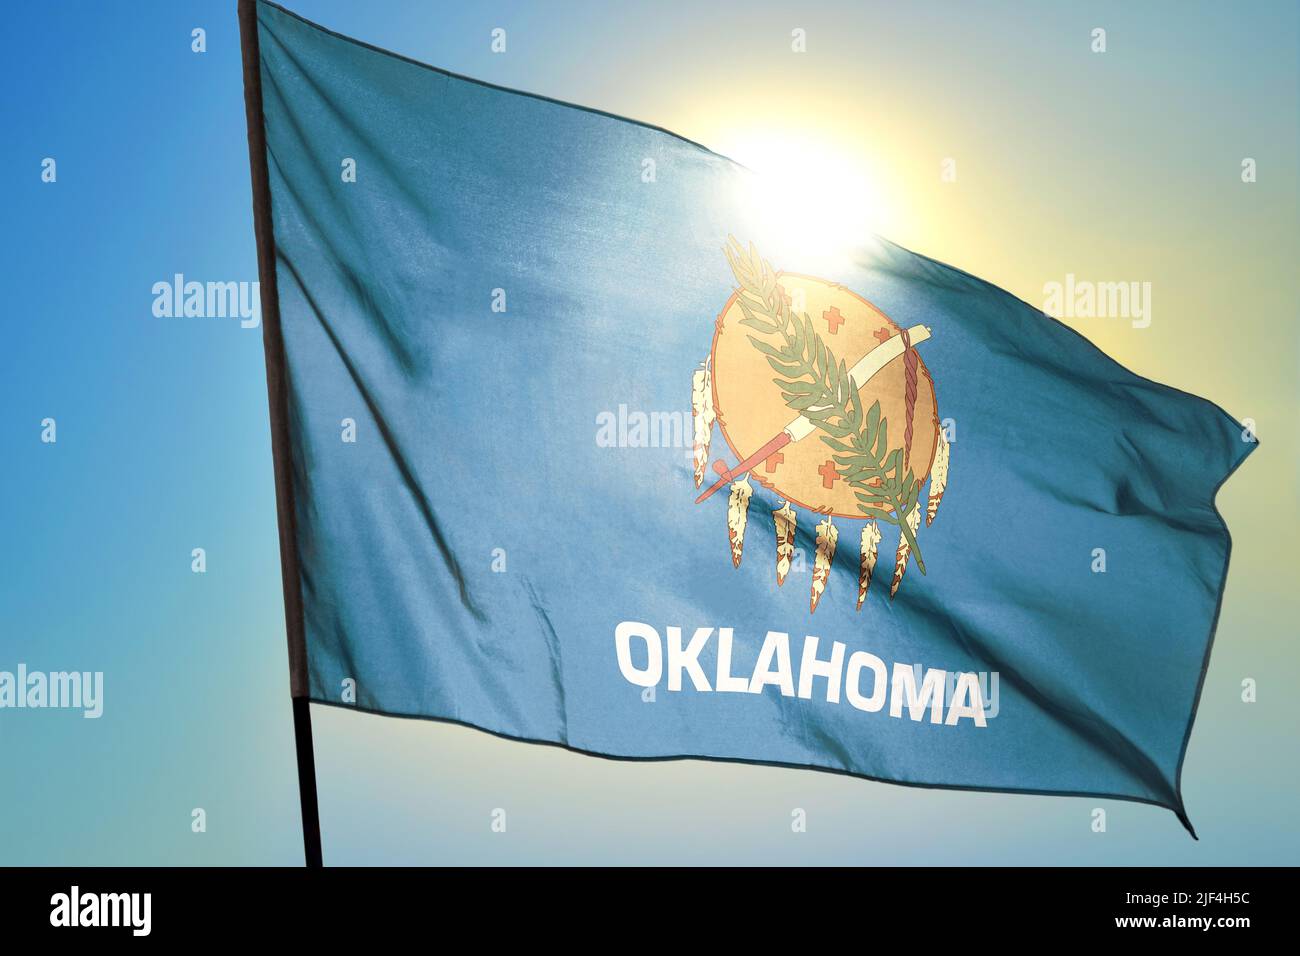 Oklahoma state of United States flag waving on the wind Stock Photo